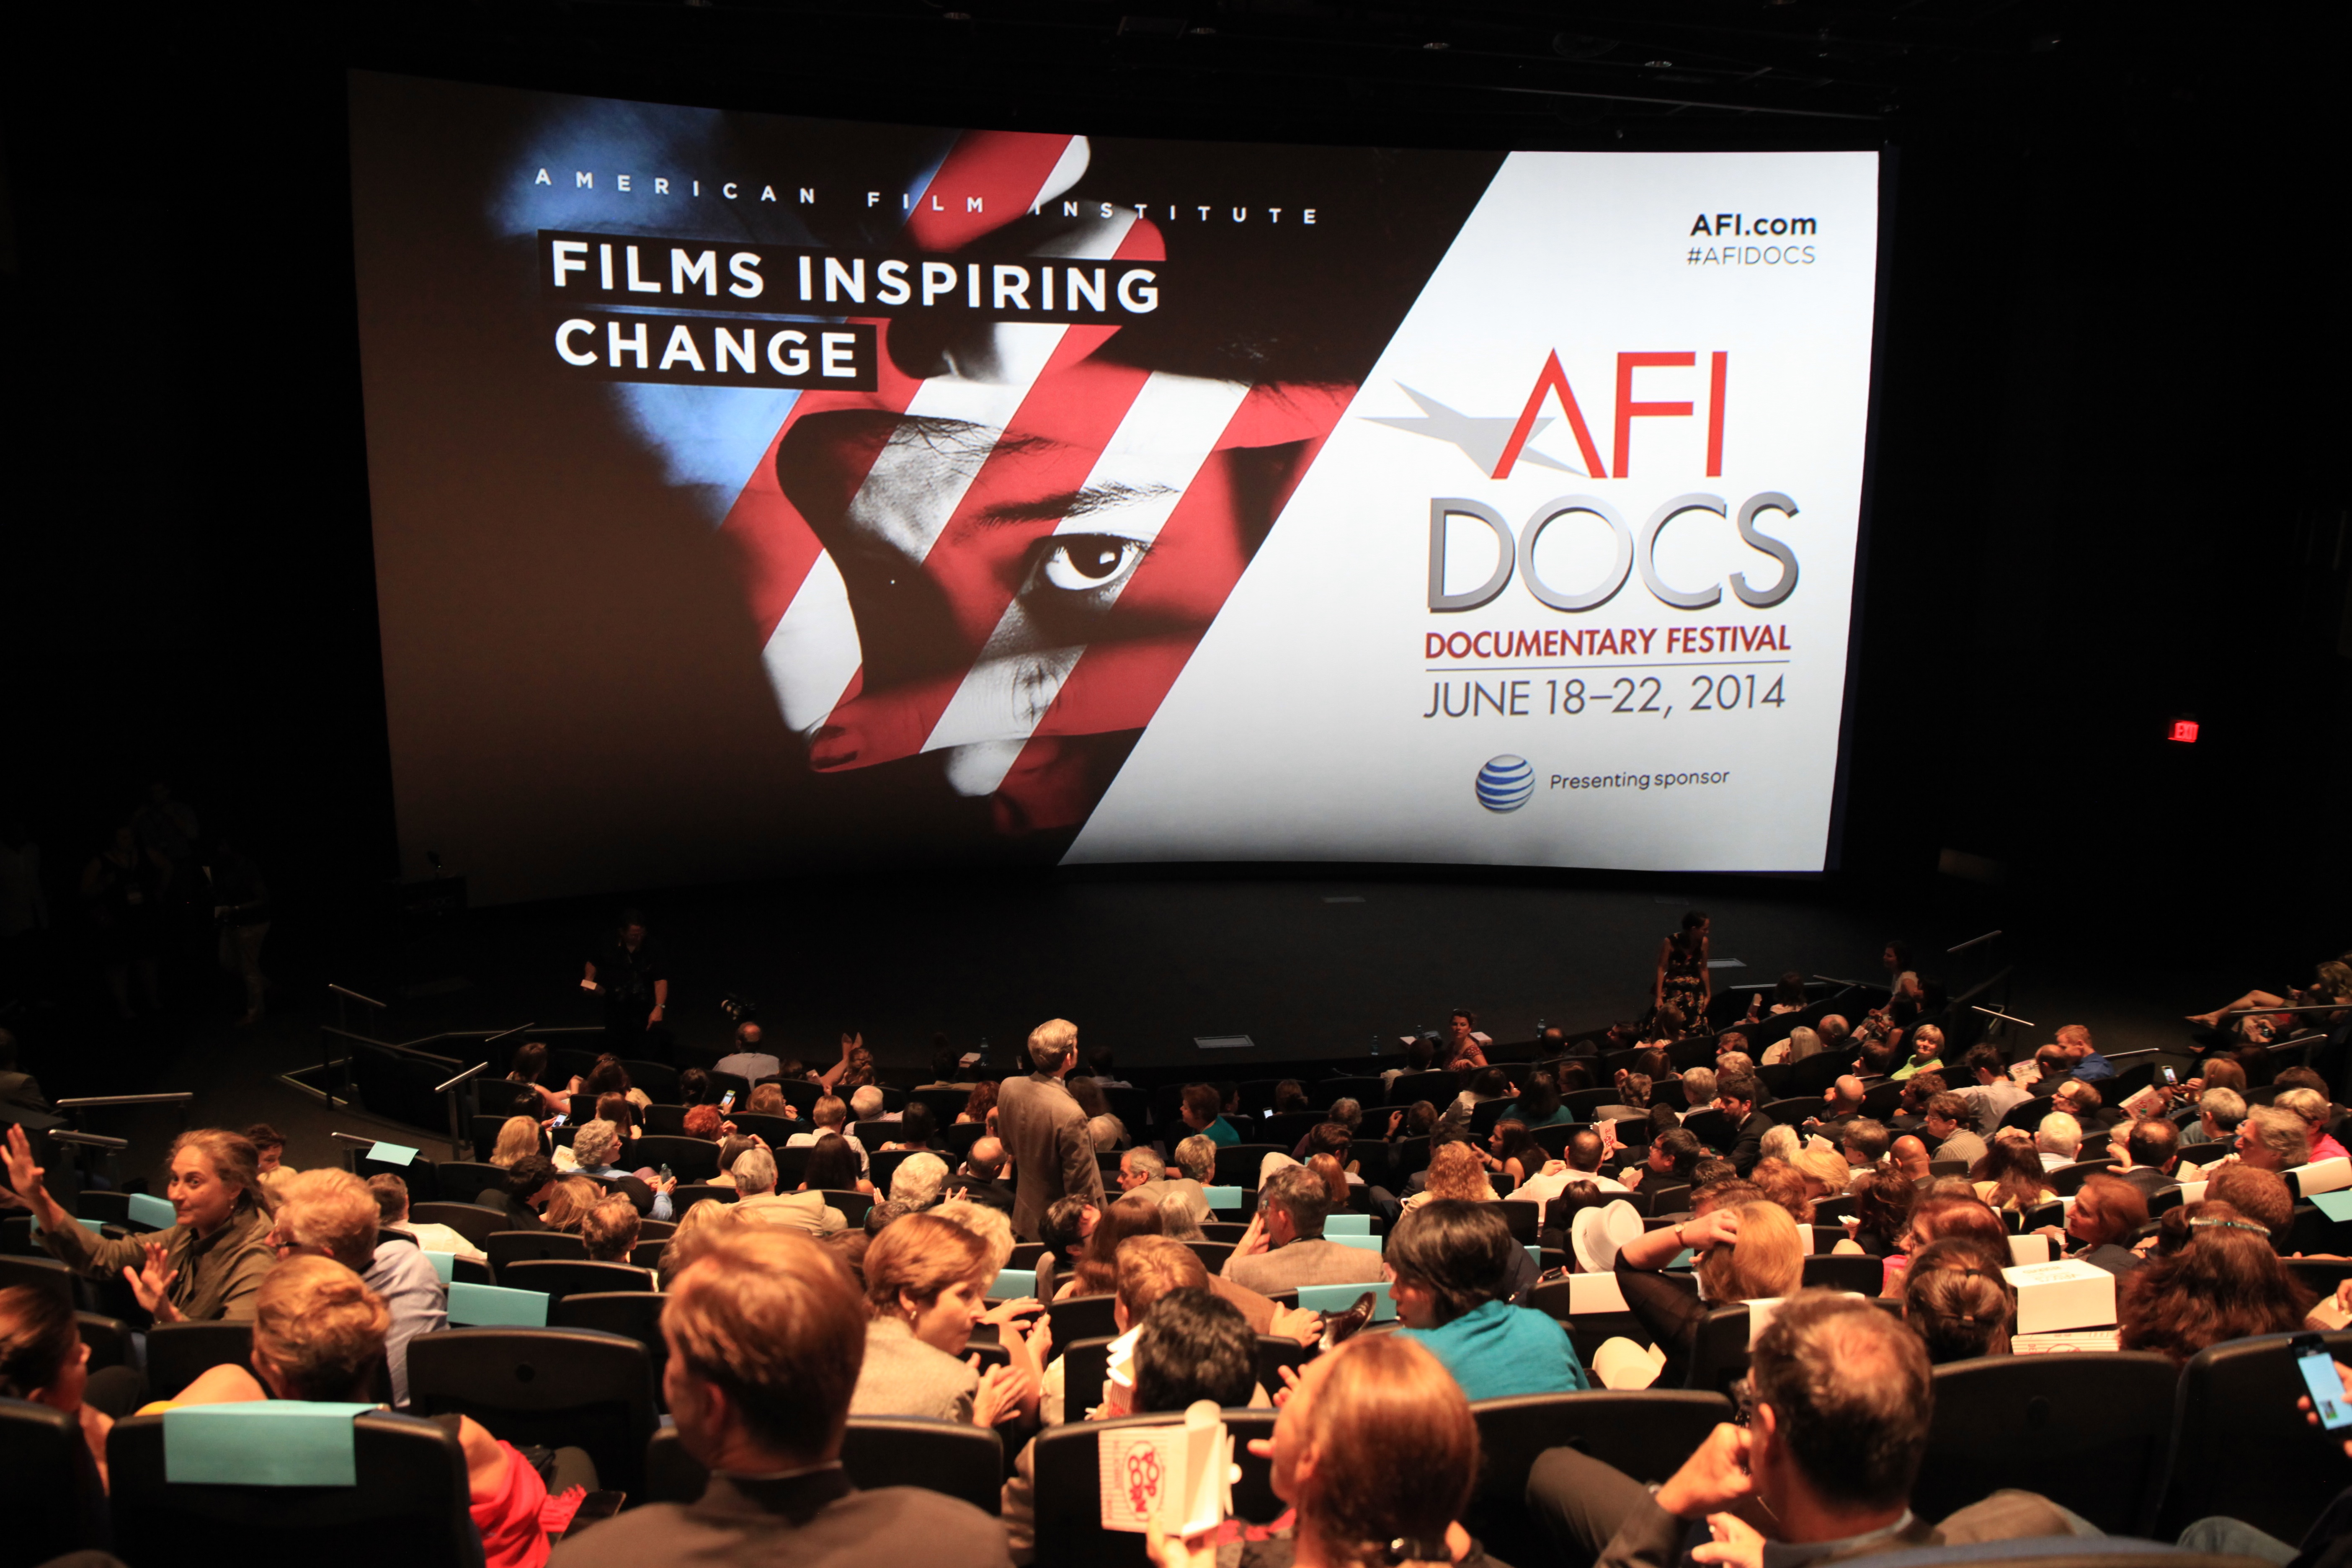 Attendees at the opening night film for AFI Docs. (Photo: AFI Docs)